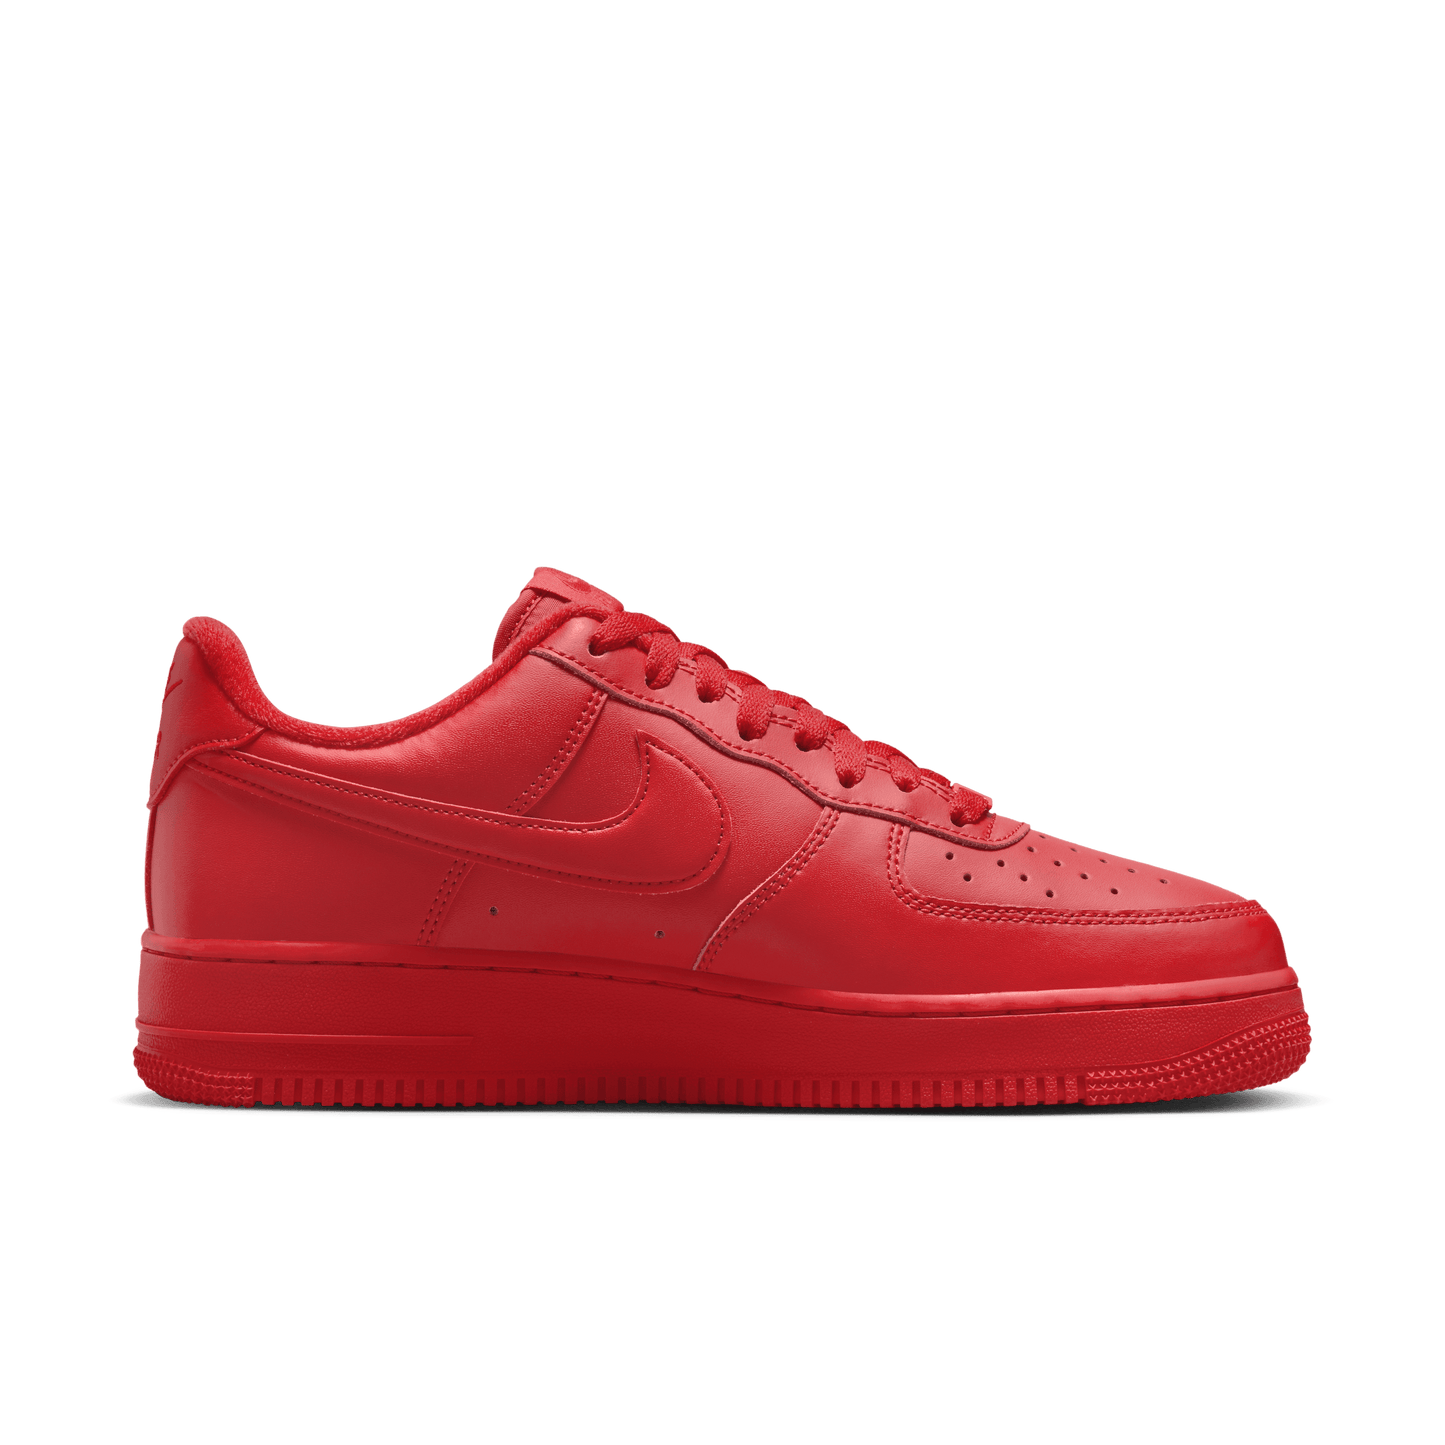 Nike Air Force 1 '07 LV8 1 Reds